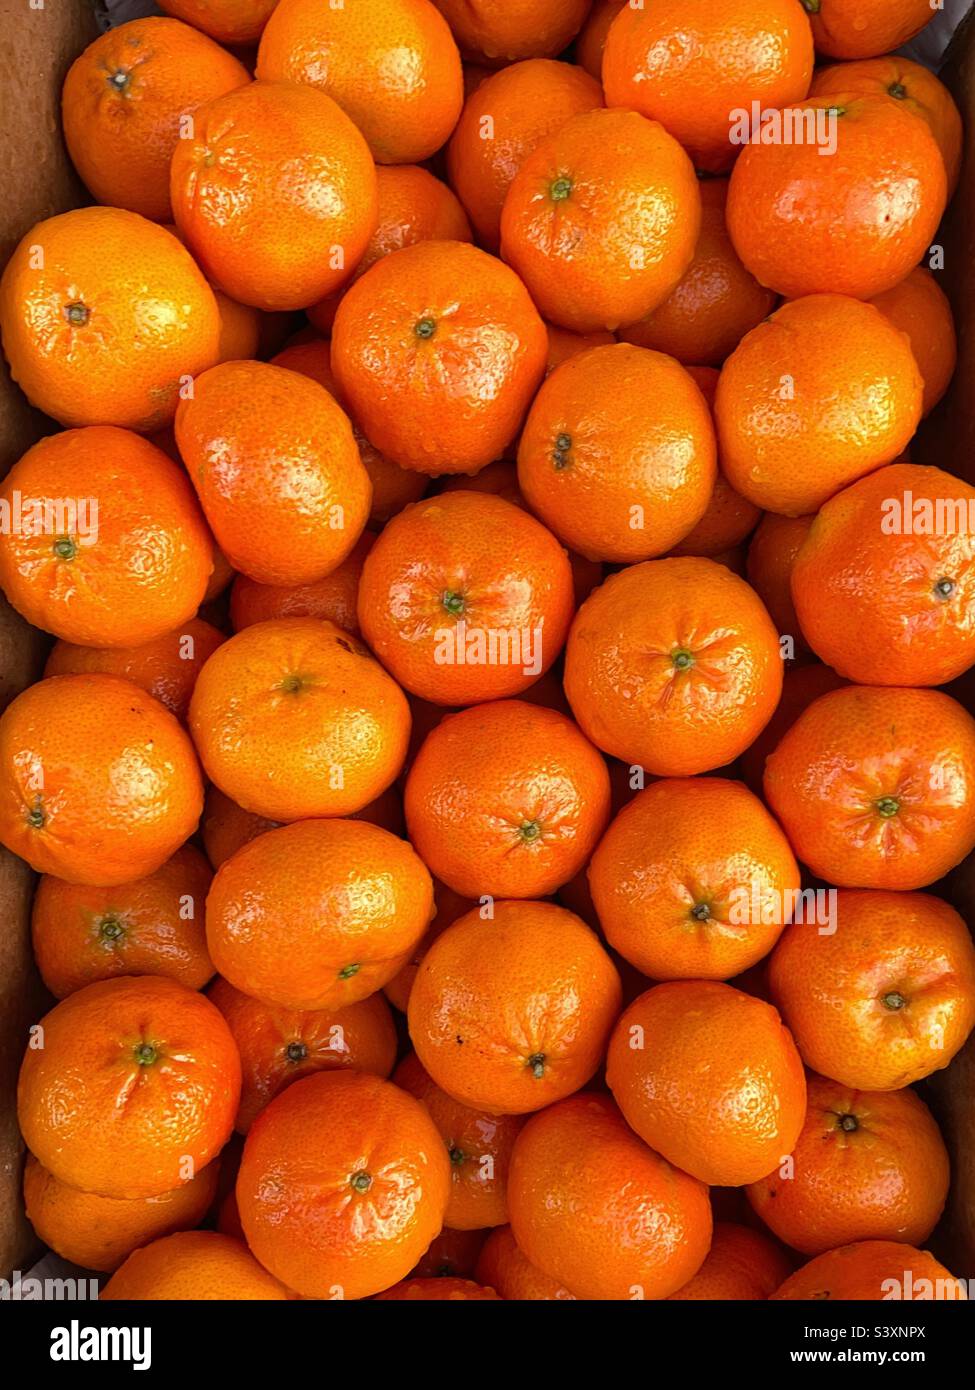 Tangerines on display on a market stall. No people. Stock Photo